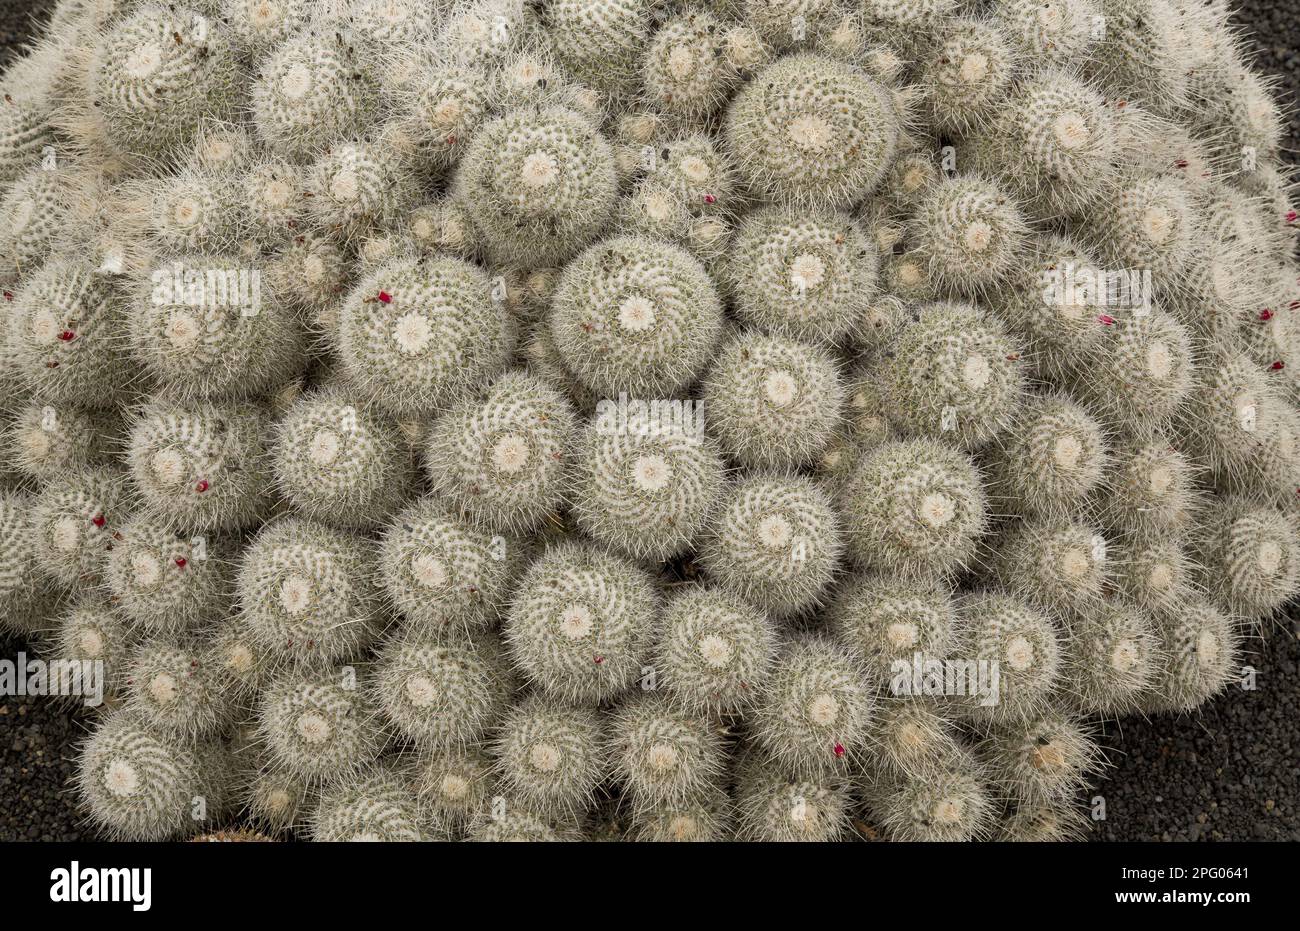 Twin spined cactus (Mammillaria geminispina), endemic twin-spined cactus, Mexico Stock Photo